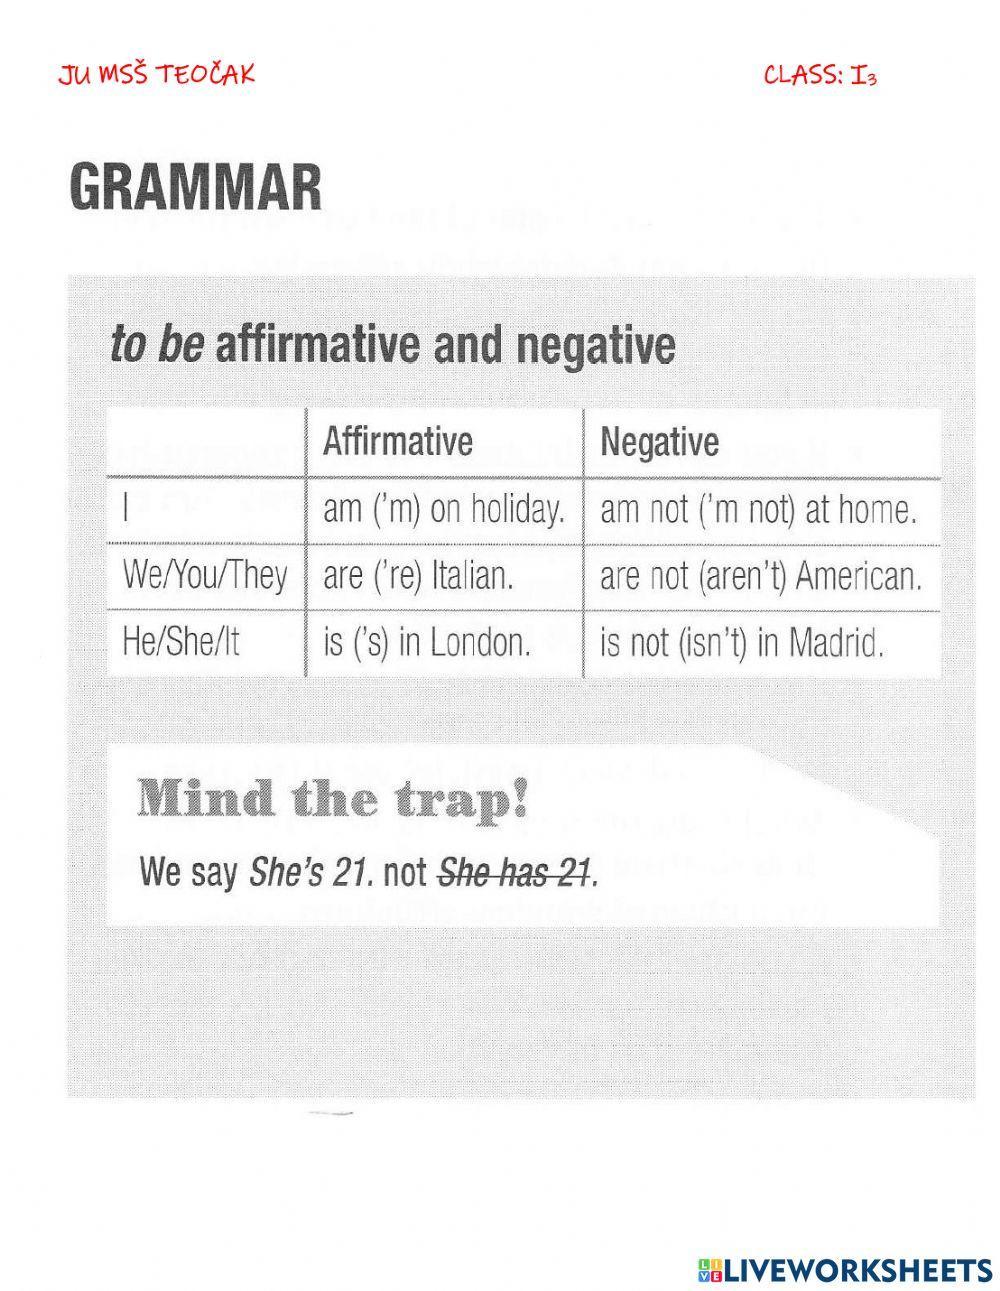 Verb TO BE - affirmative and negative